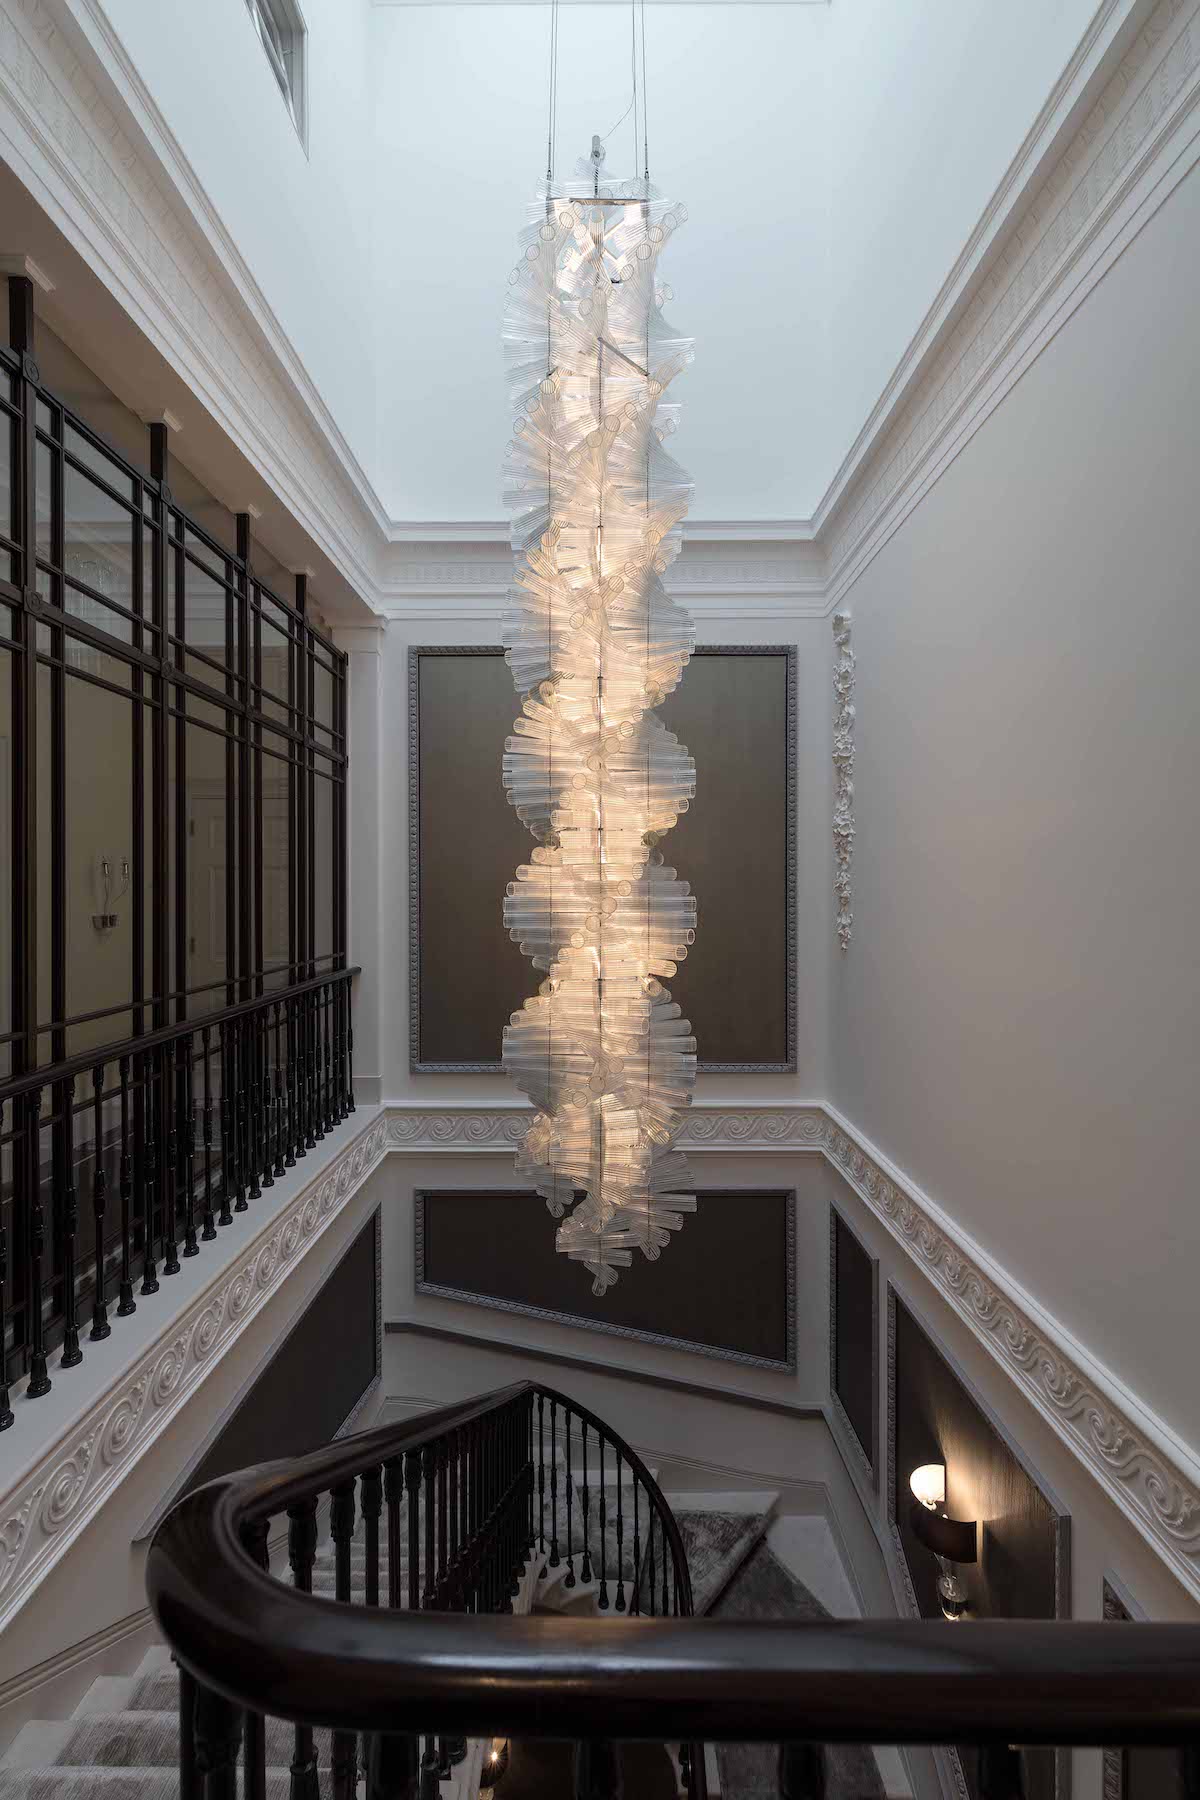 SHH Architect's installation of a Baroncelli chandelier in Effect Magazoine